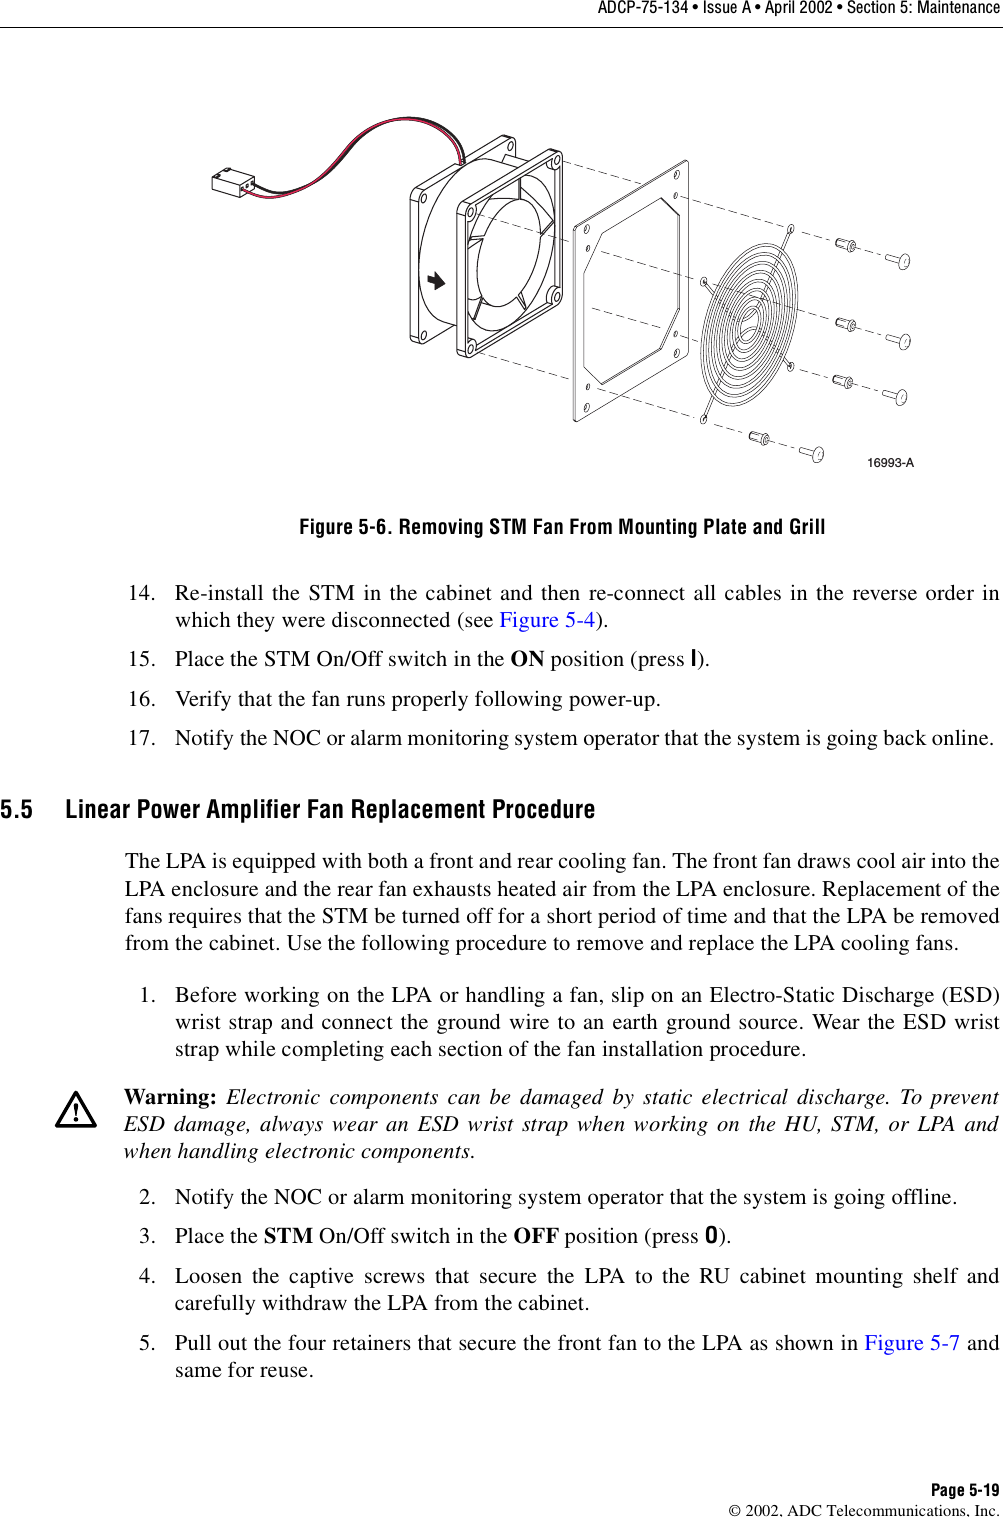 ADCP-75-134 • Issue A • April 2002 • Section 5: MaintenancePage 5-19©2002, ADC Telecommunications, Inc.Figure 5-6. Removing STM Fan From Mounting Plate and Grill14. Re-install the STM in the cabinet and then re-connect all cables in the reverse order inwhich they were disconnected (see Figure 5-4).15. Place the STM On/Off switch in the ON position (press I).16. Verify that the fan runs properly following power-up.17. Notify the NOC or alarm monitoring system operator that the system is going back online.5.5 Linear Power Amplifier Fan Replacement ProcedureThe LPA is equipped with both afront and rear cooling fan. The front fan draws cool air into theLPA enclosure and the rear fan exhausts heated air from the LPA enclosure. Replacement of thefans requires that the STM be turned off for ashort period of time and that the LPA be removedfrom the cabinet. Use the following procedure to remove and replace the LPA cooling fans.1. Before working on the LPA or handling afan, slip on an Electro-Static Discharge (ESD)wrist strap and connect the ground wire to an earth ground source. Wear the ESD wriststrap while completing each section of the fan installation procedure.2. Notify the NOC or alarm monitoring system operator that the system is going offline.3. Place the STM On/Off switch in the OFF position (press O).4. Loosen the captive screws that secure the LPA to the RU cabinet mounting shelf andcarefully withdraw the LPA from the cabinet.5. Pull out the four retainers that secure the front fan to the LPA as shown in Figure 5-7 andsame for reuse.Warning: Electronic components can be damaged by static electrical discharge. To preventESD damage, always wear an ESD wrist strap when working on the HU, STM, or LPA andwhen handling electronic components.16993-A